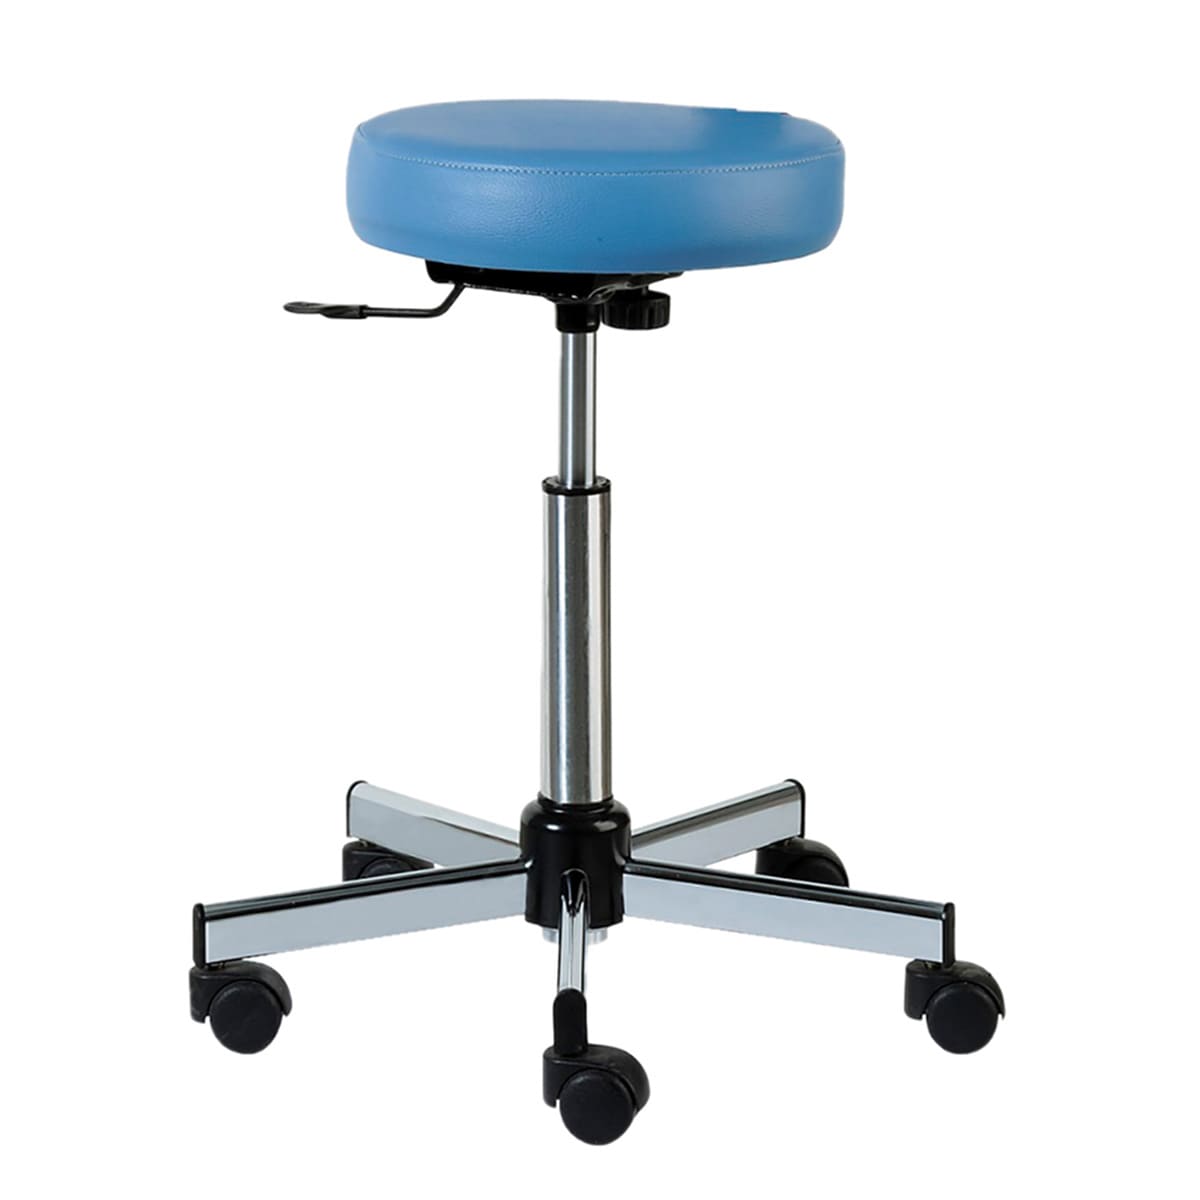 Stool with round seat, stainless steel base